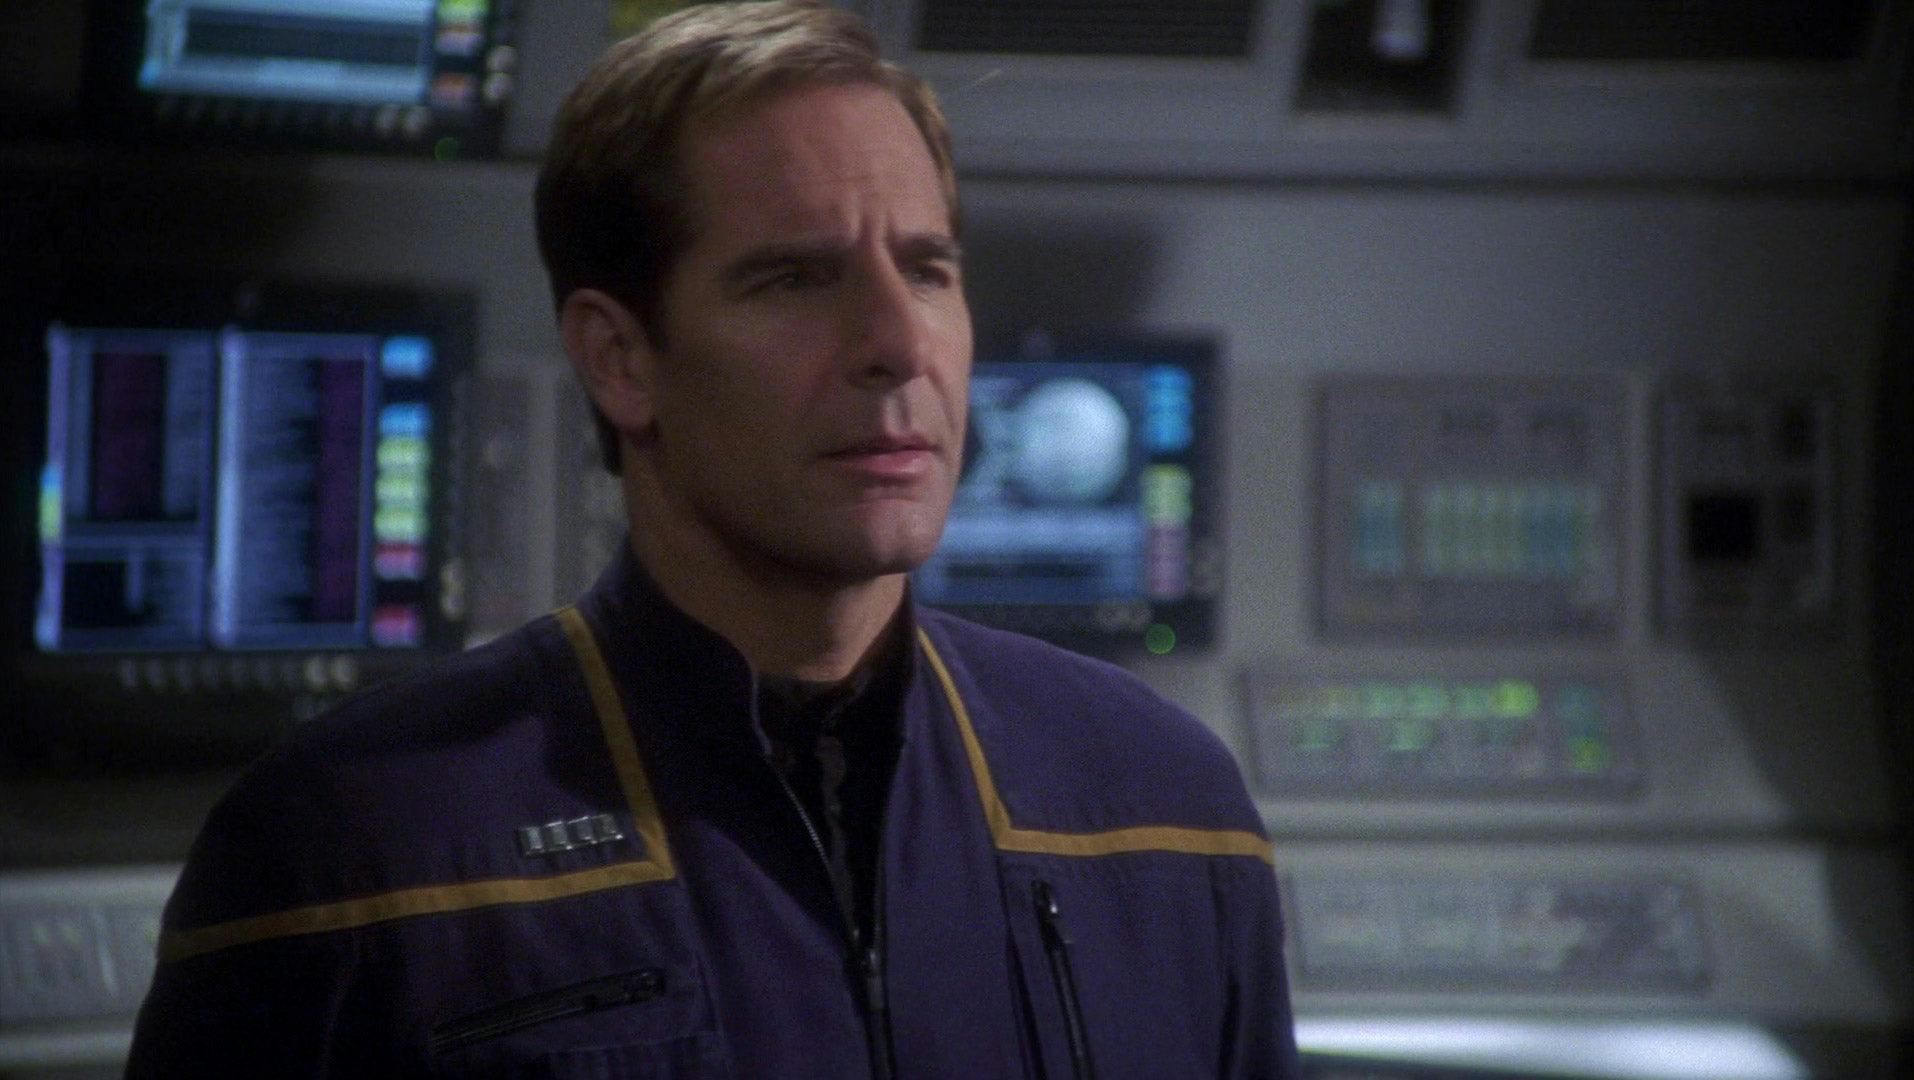 Captain Archer stands on the bridge of the NX-01, looking concerned.